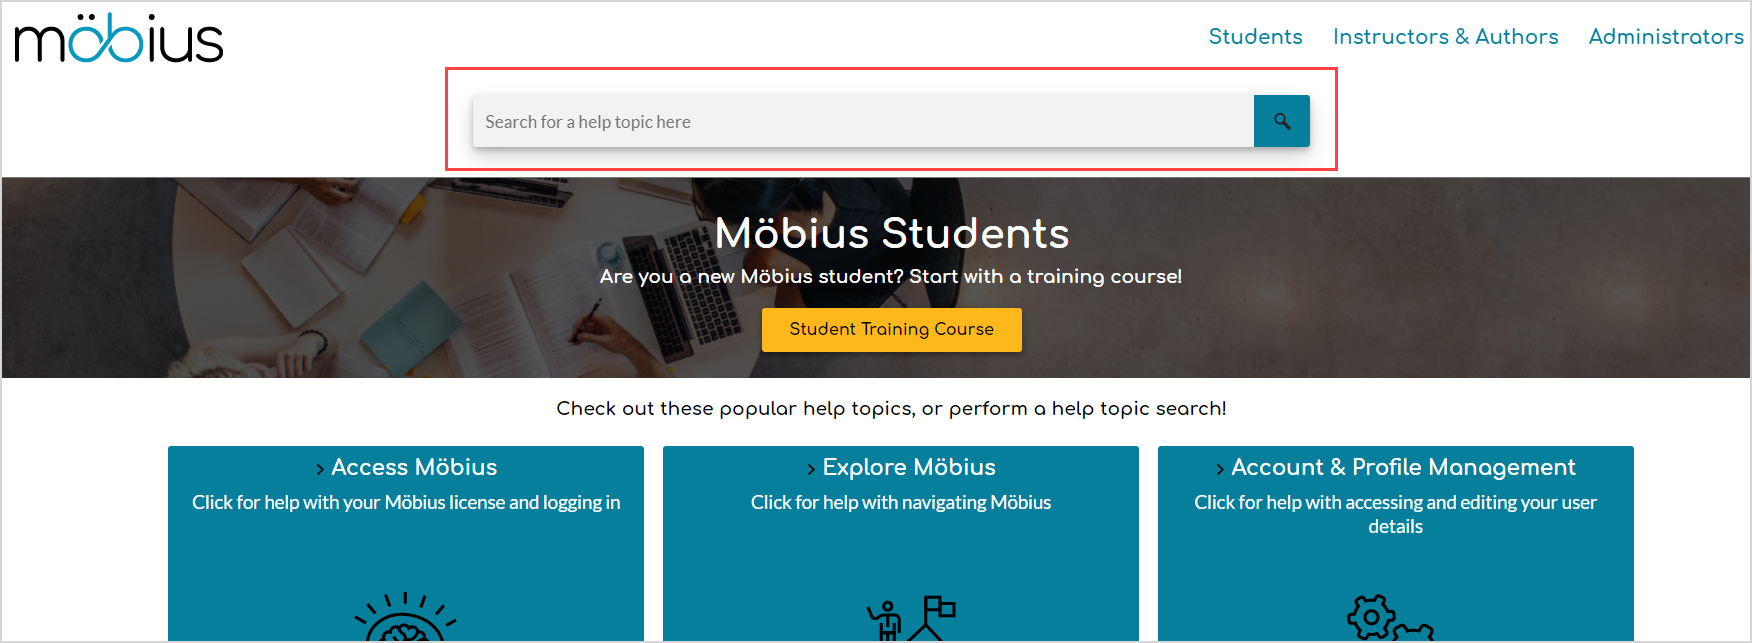 There's a search bar at the top of the Möbius Student Online Help page.